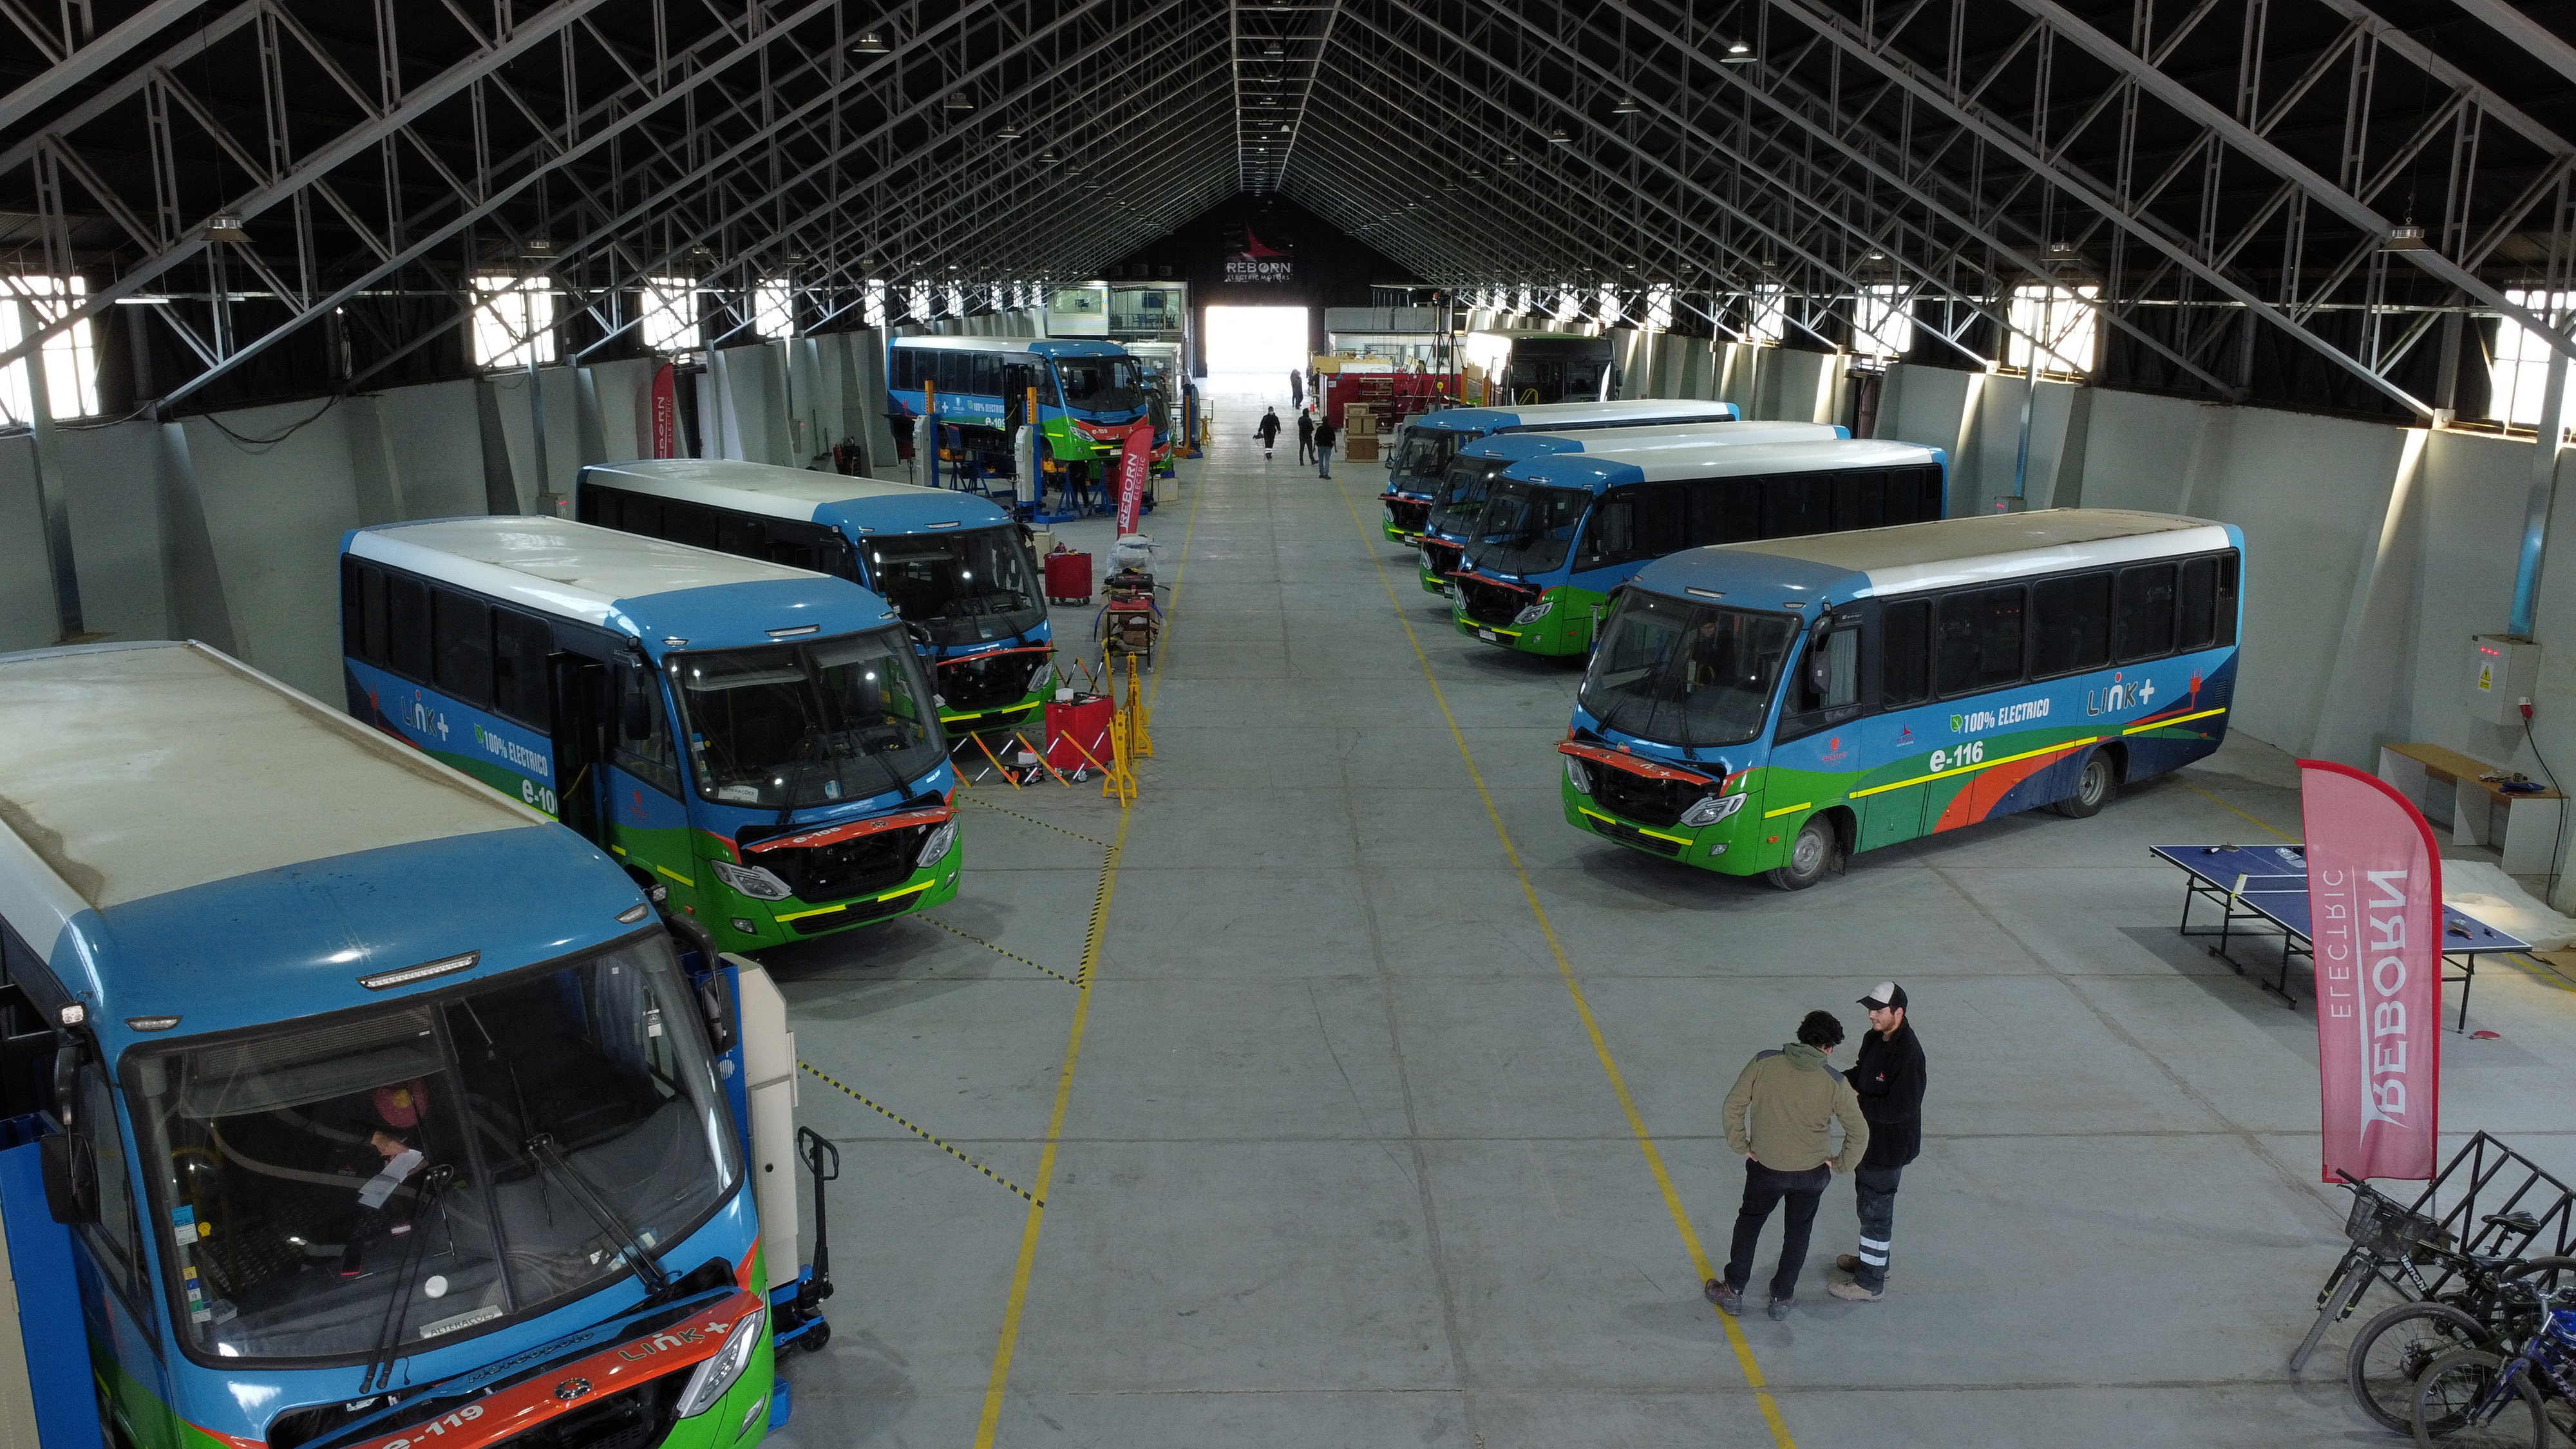 Electric bus factory plant in Rancagua